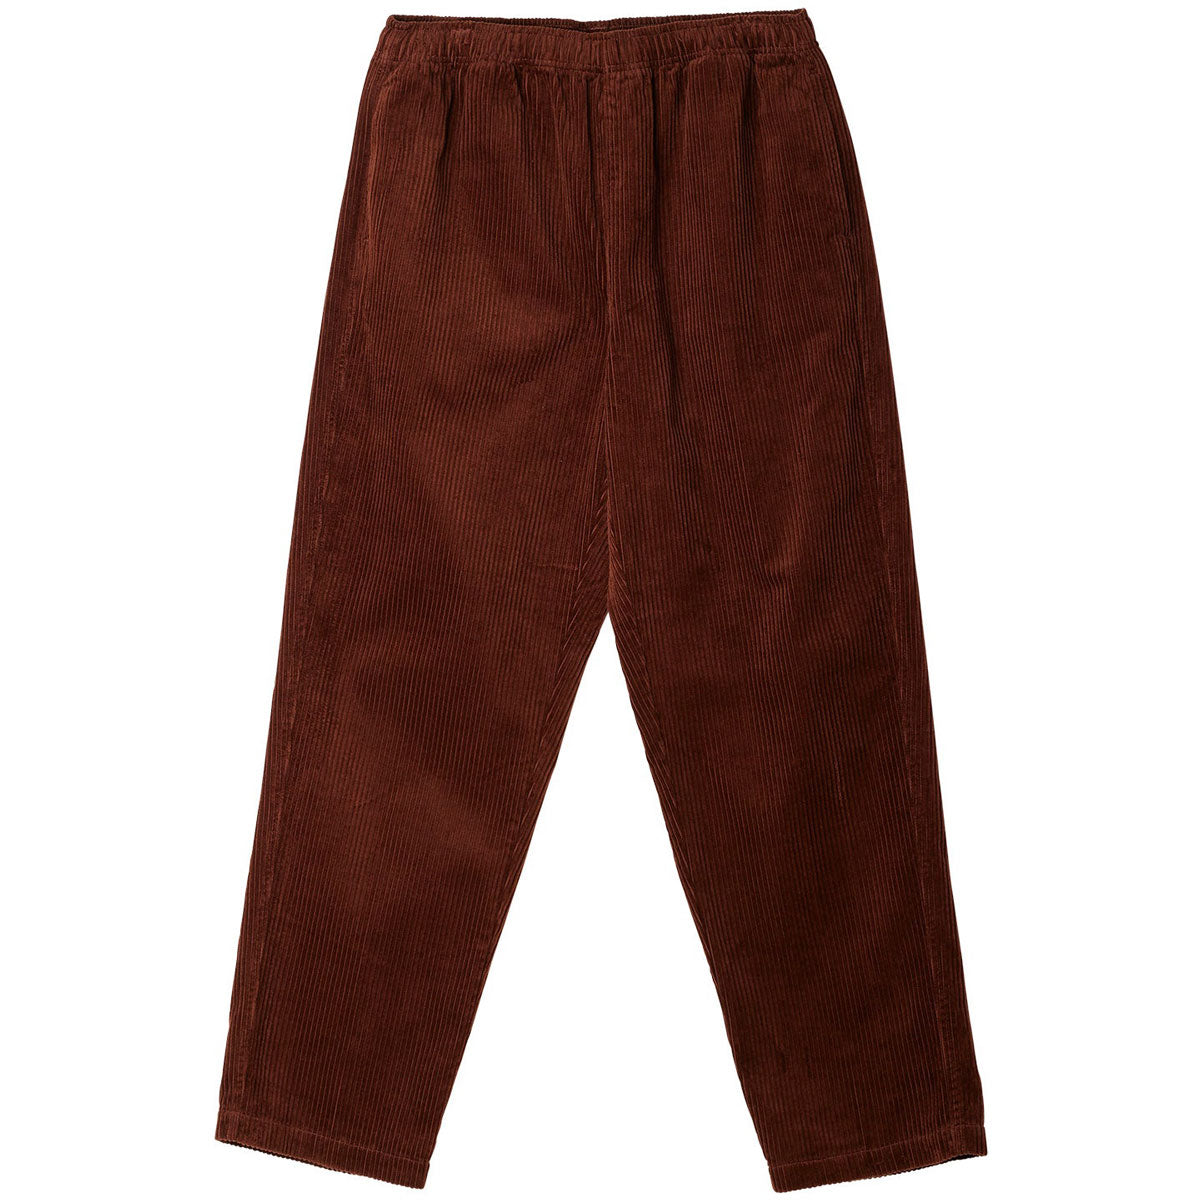 Obey Easy Cord Pants - Sepia image 1